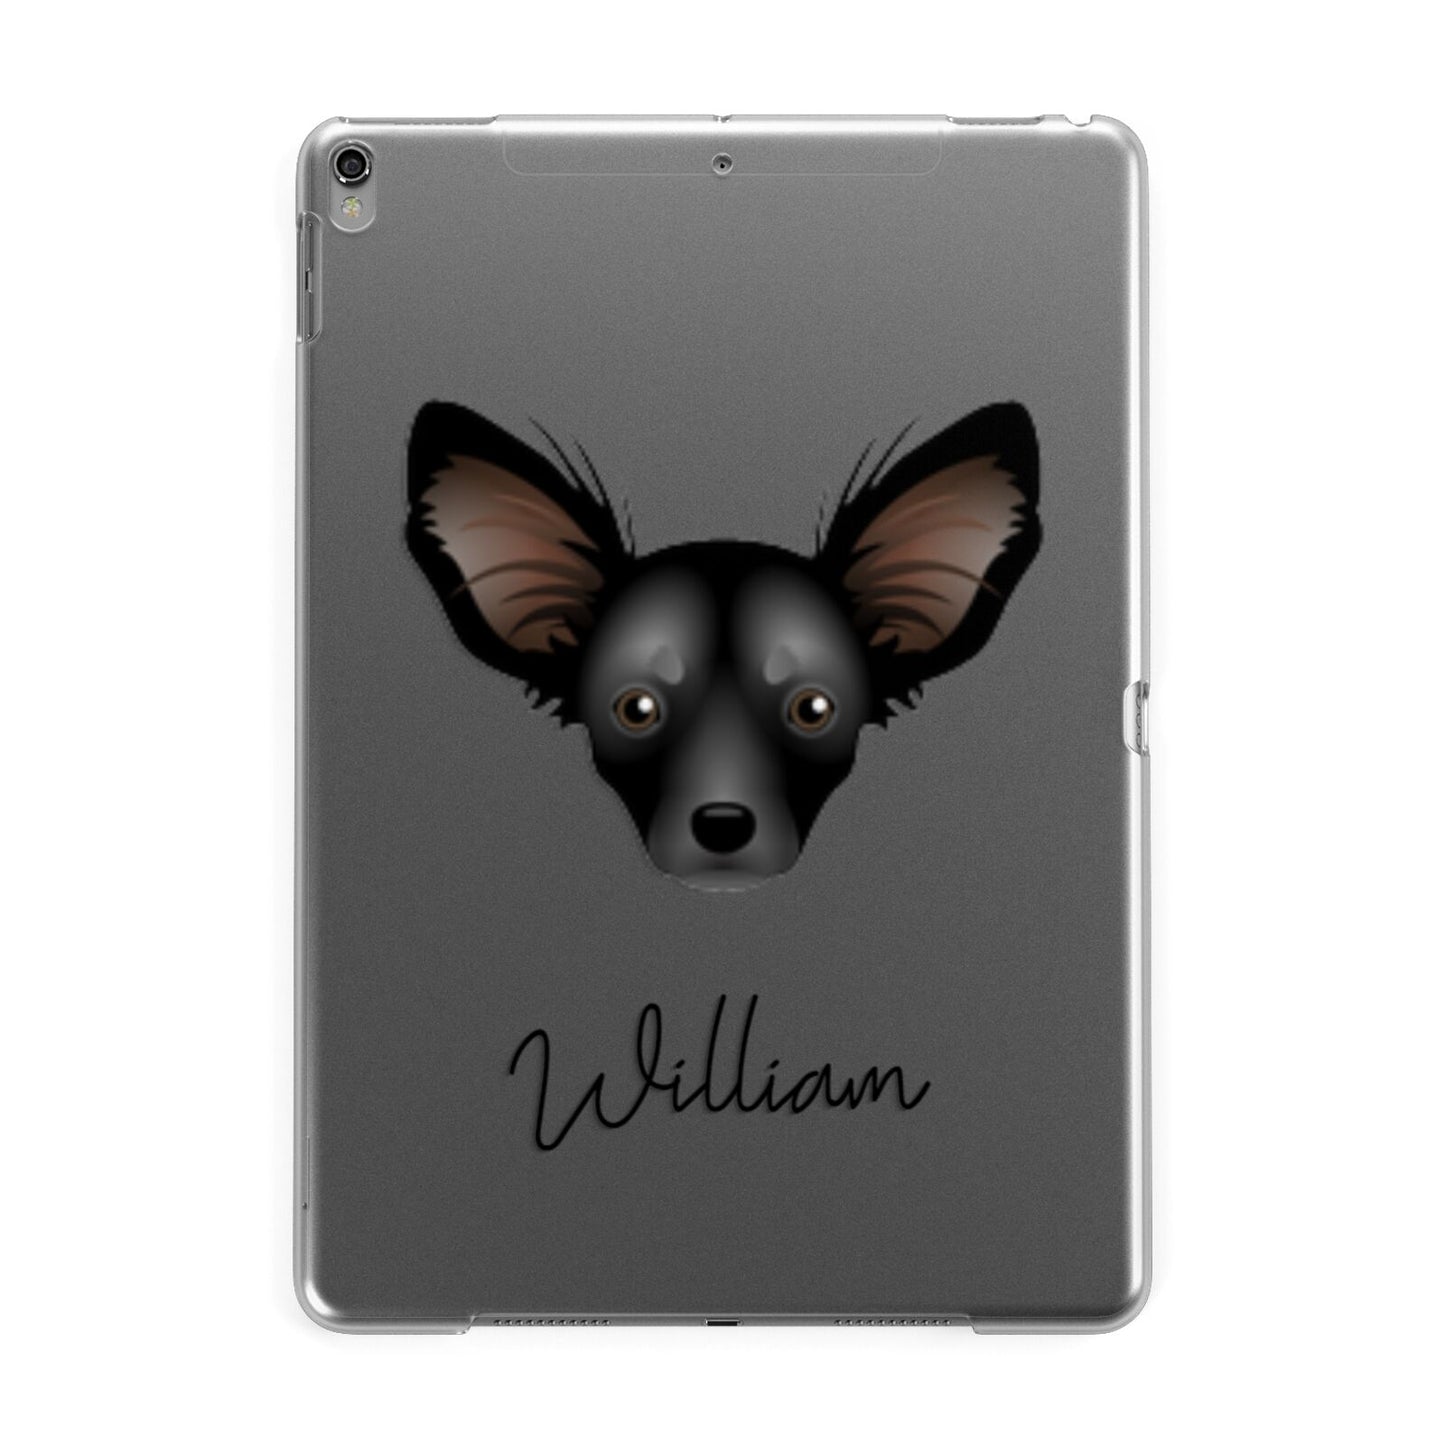 Russian Toy Personalised Apple iPad Grey Case